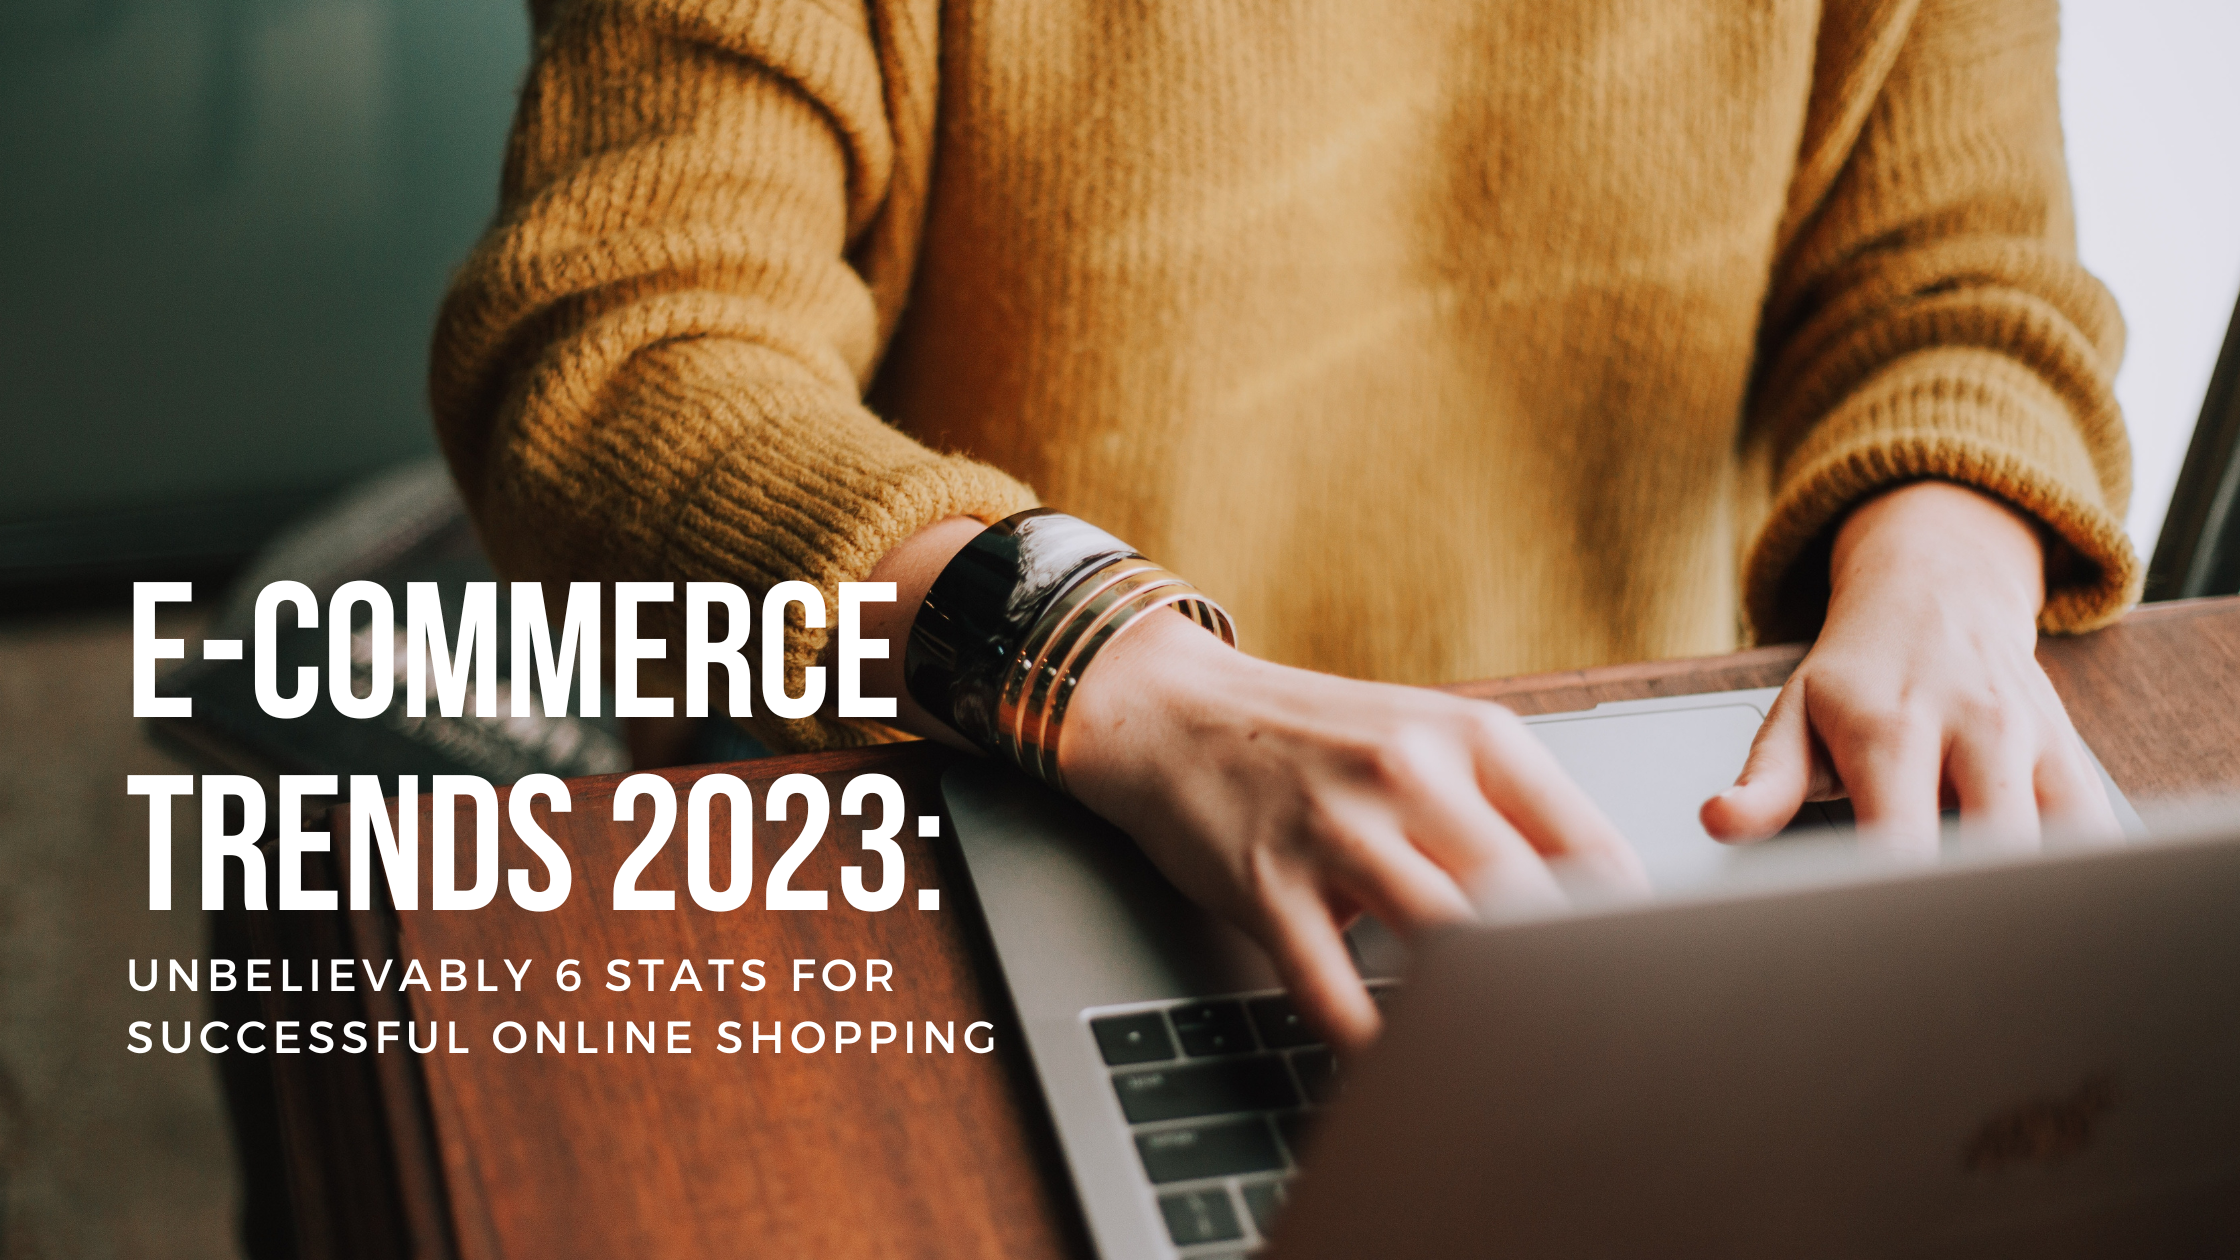 E-commerce trends 2023: unbelievably 6 stats for successful online shopping